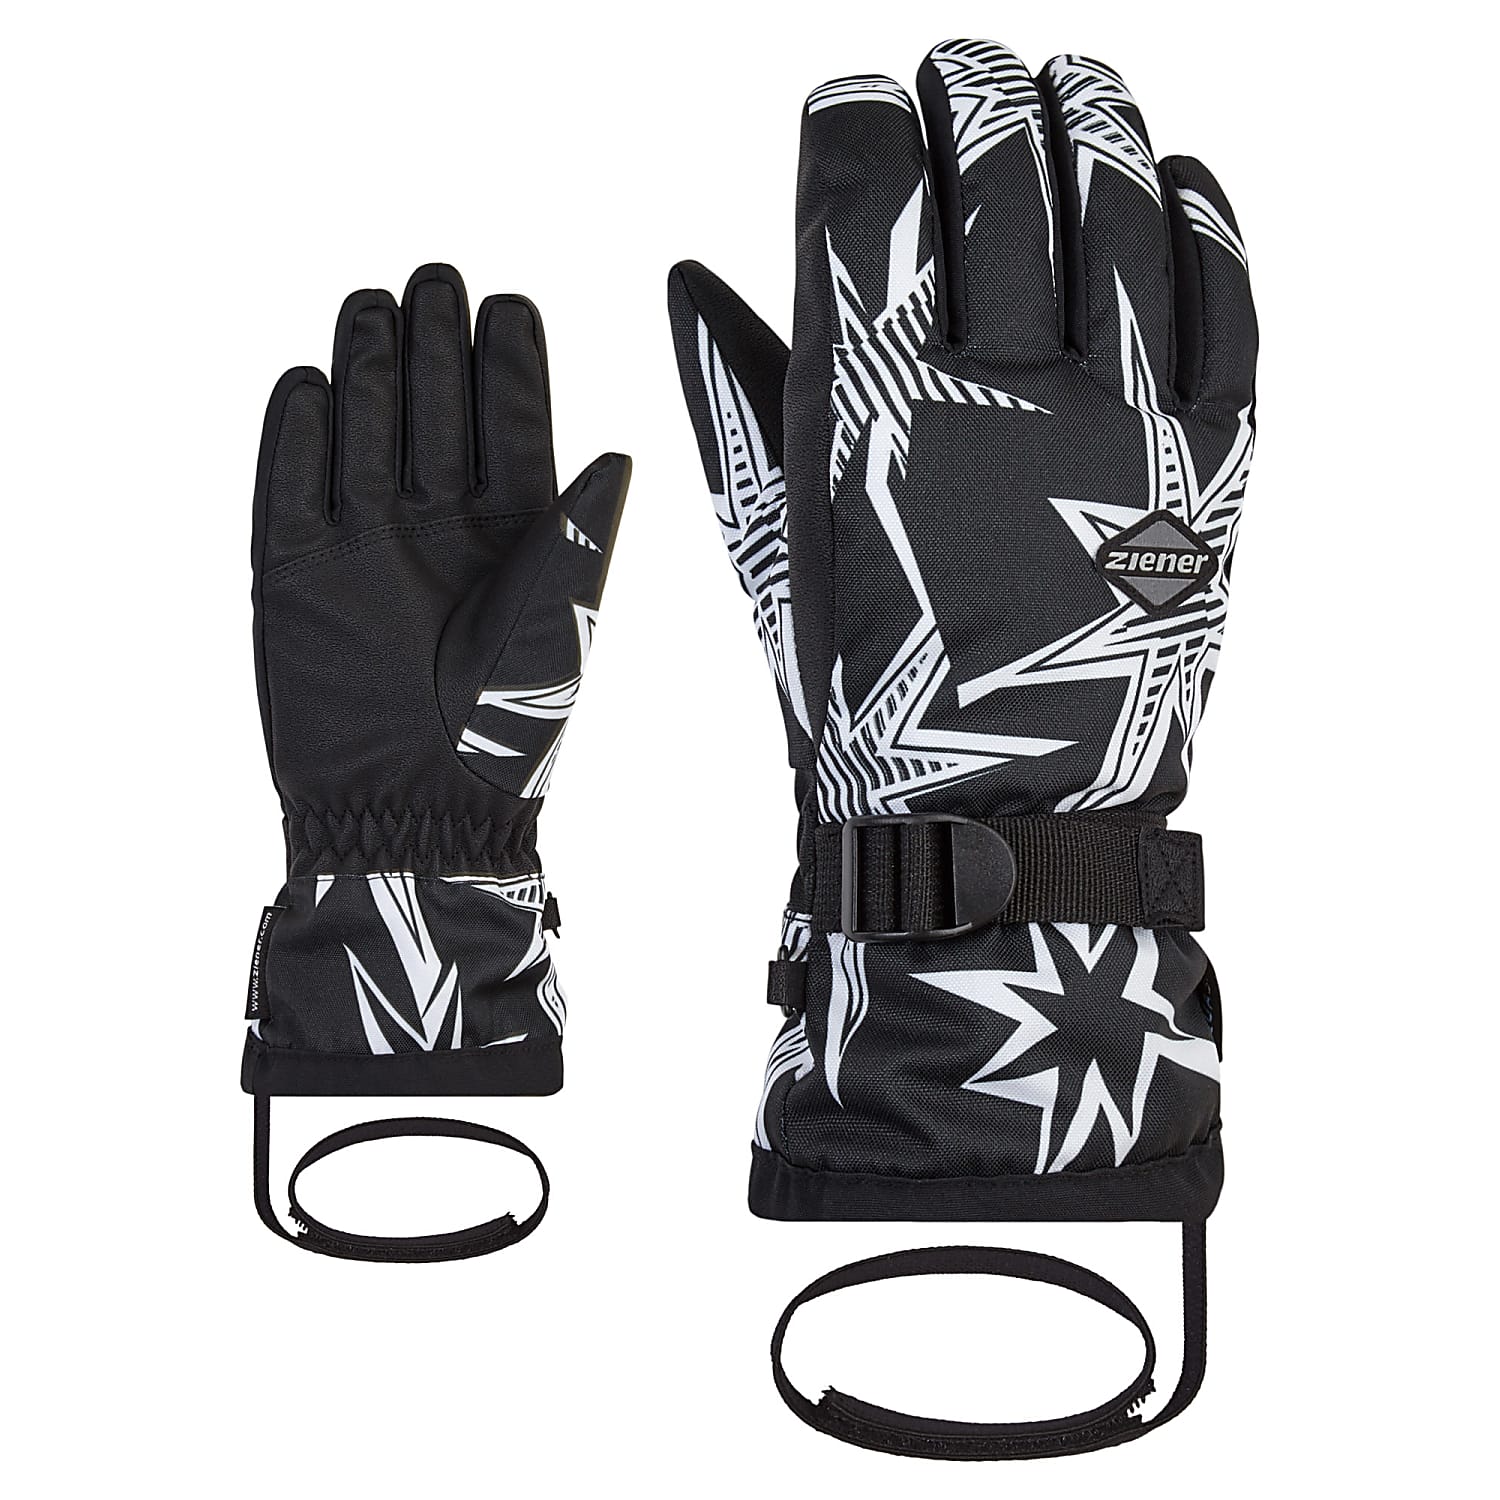 - GLOVE, and shipping Fast JUNIOR cheap AS Ziener LASSIM Black